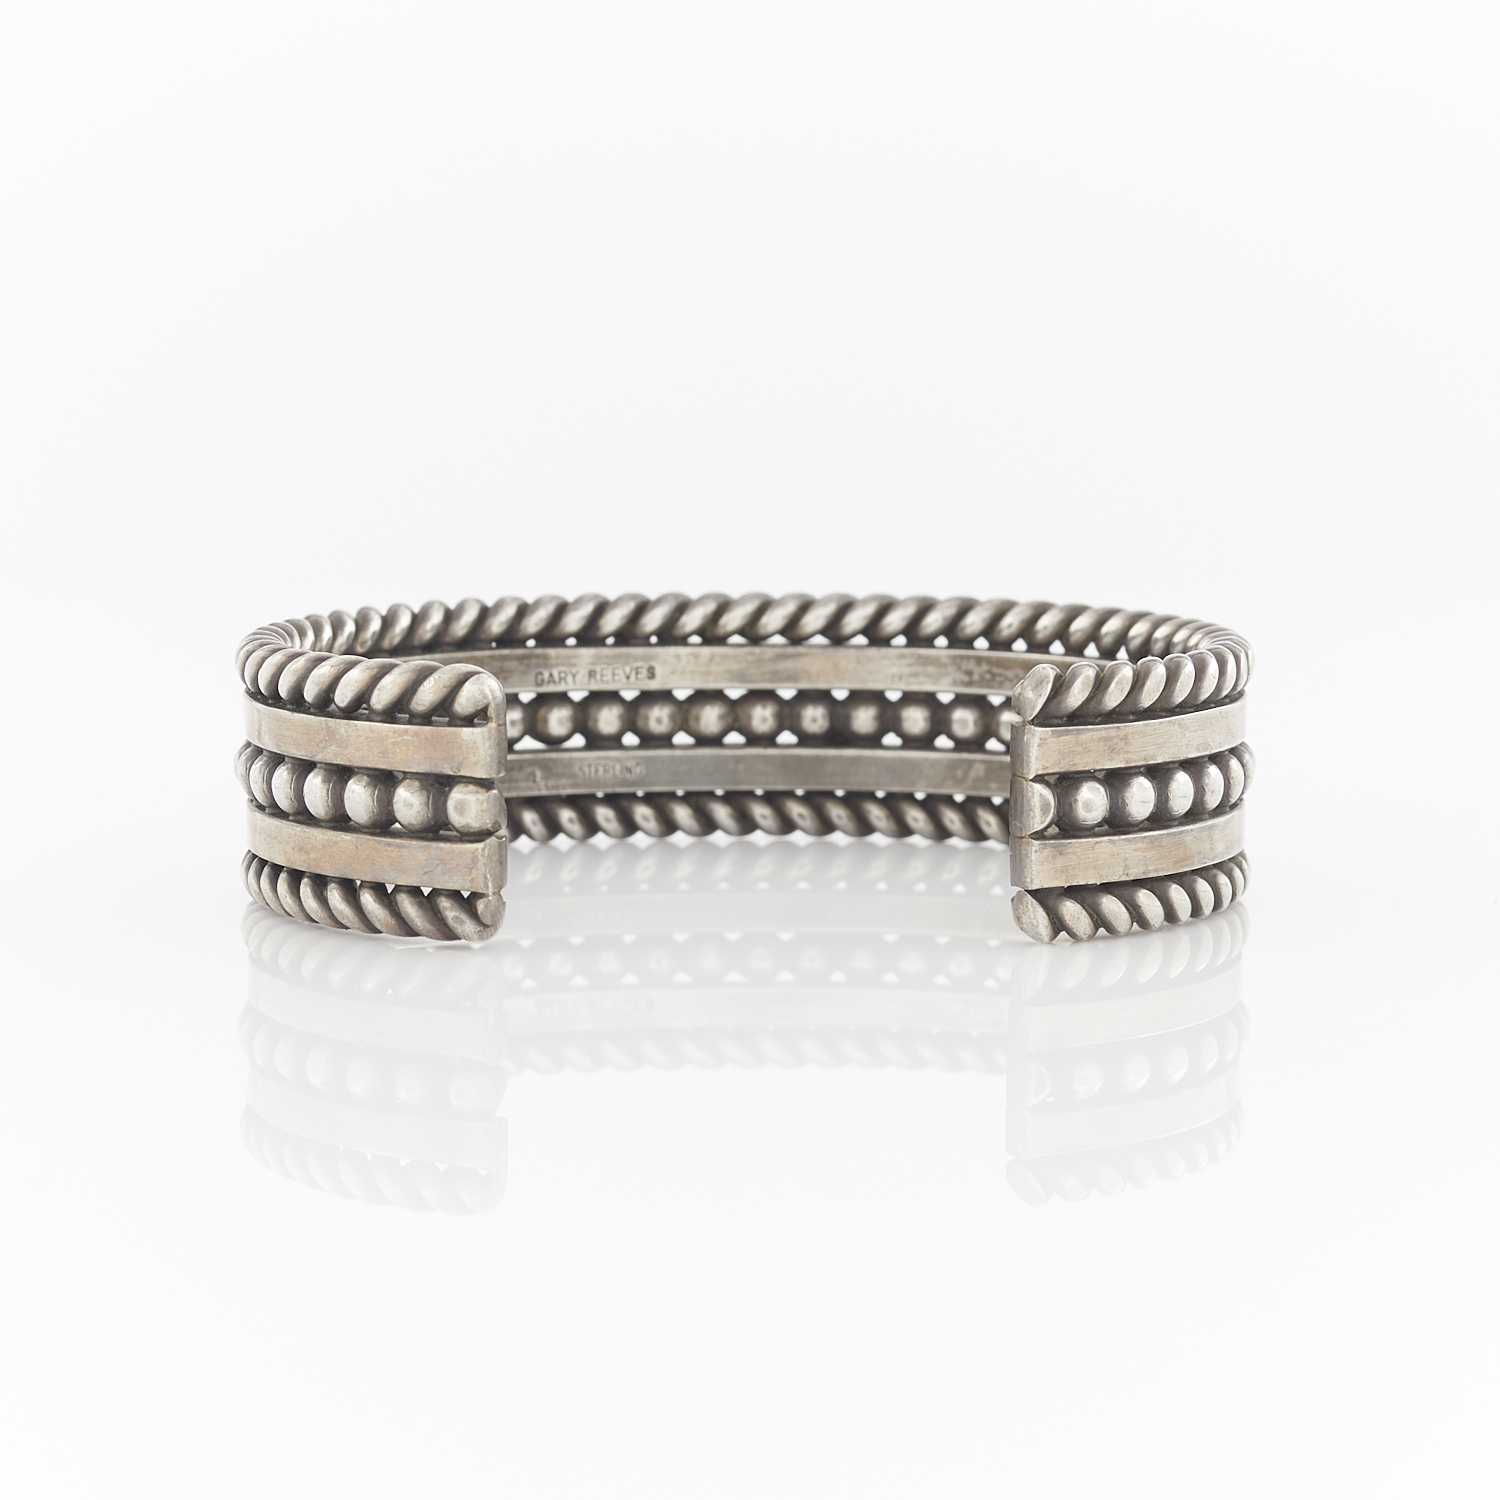 Gary Reeves Sterling Silver Bangle - Image 4 of 10